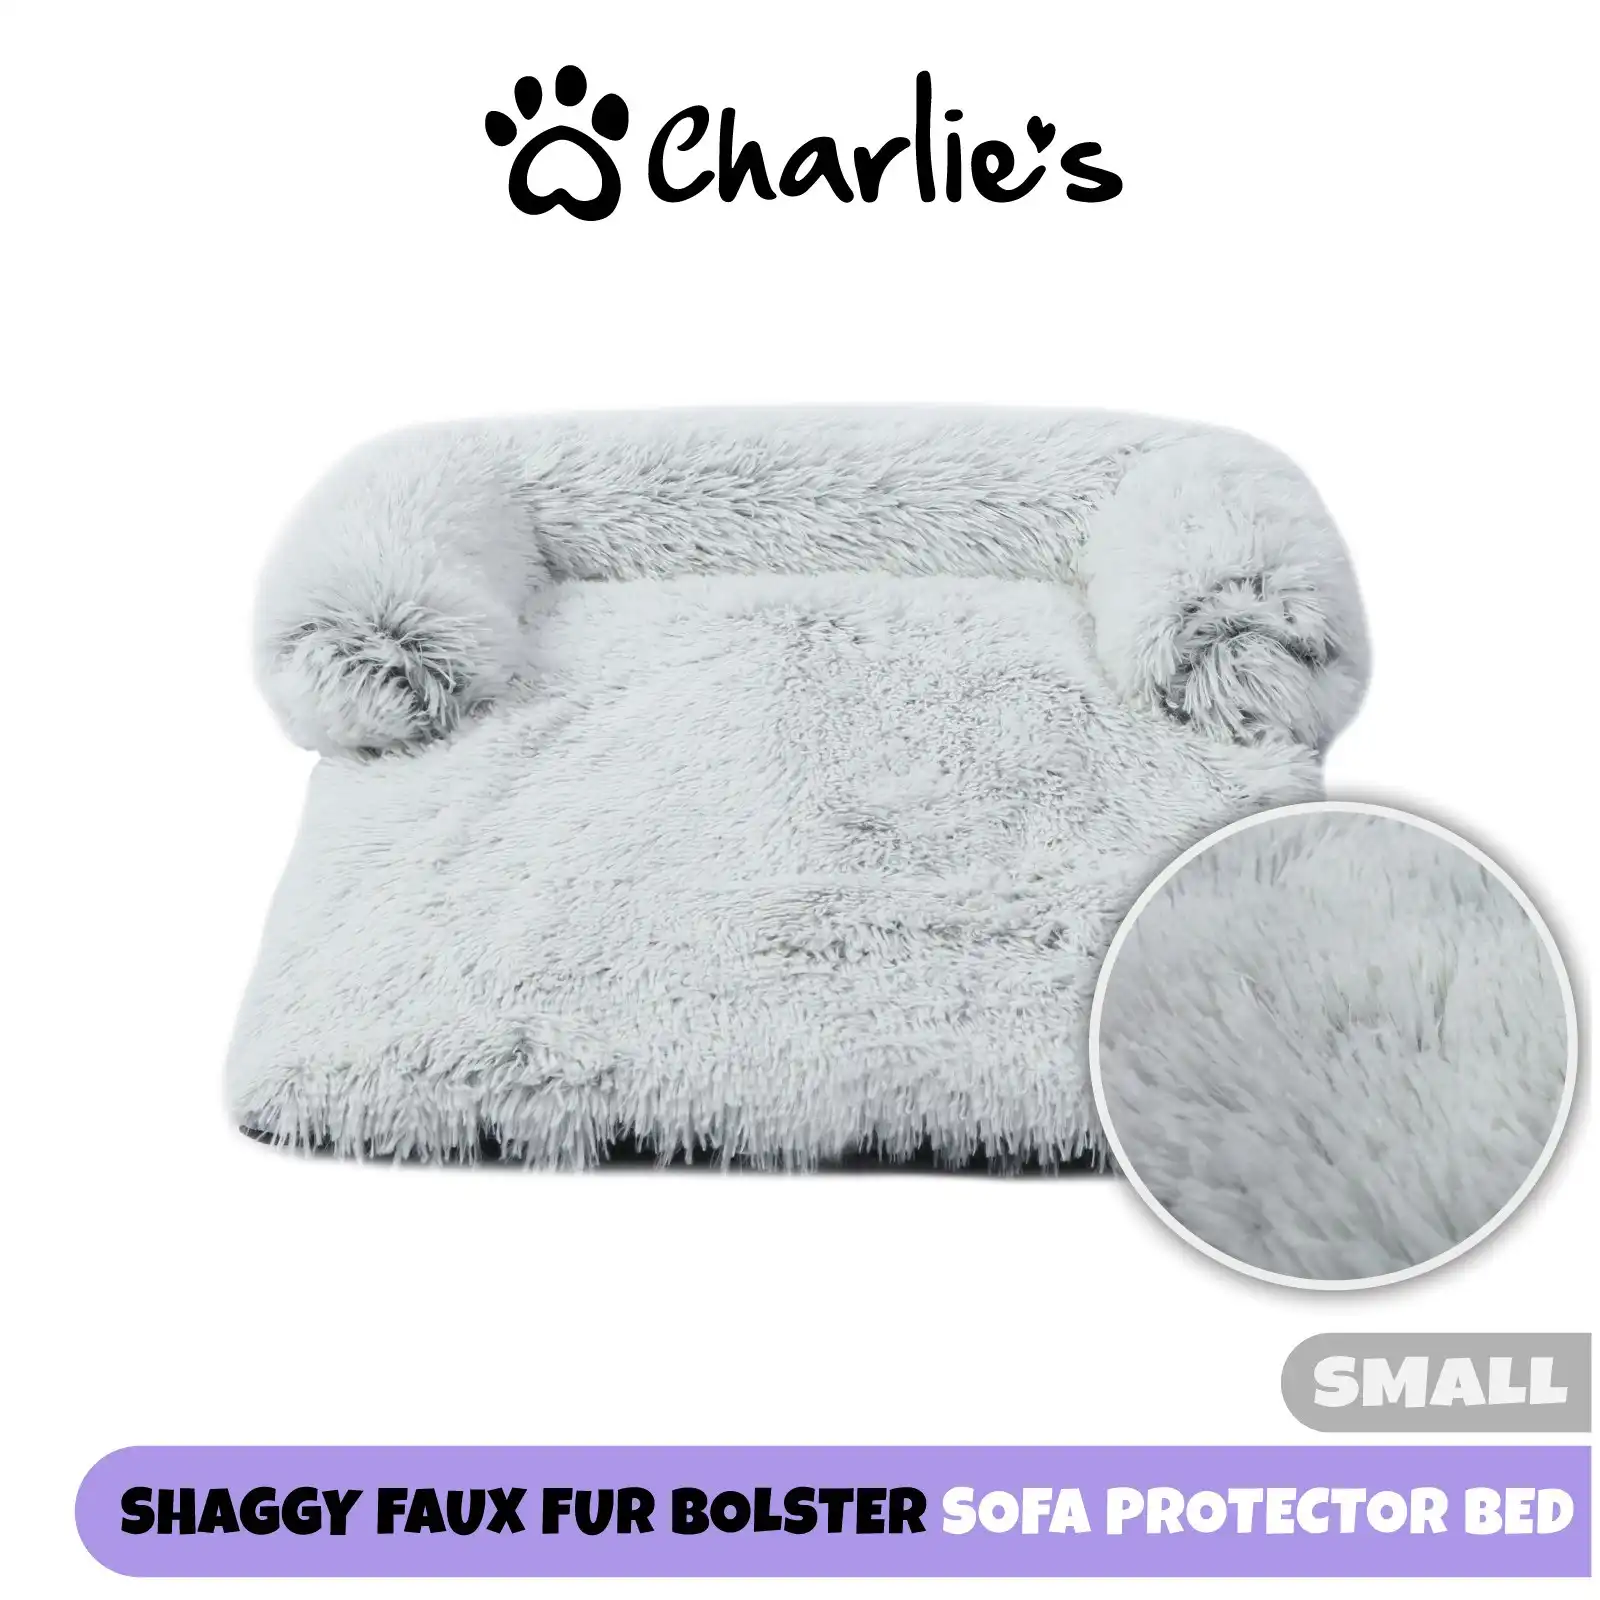 Charlie's Shaggy Faux Fur Bolster Sofa Protector Calming Dog Bed Arctic White Small